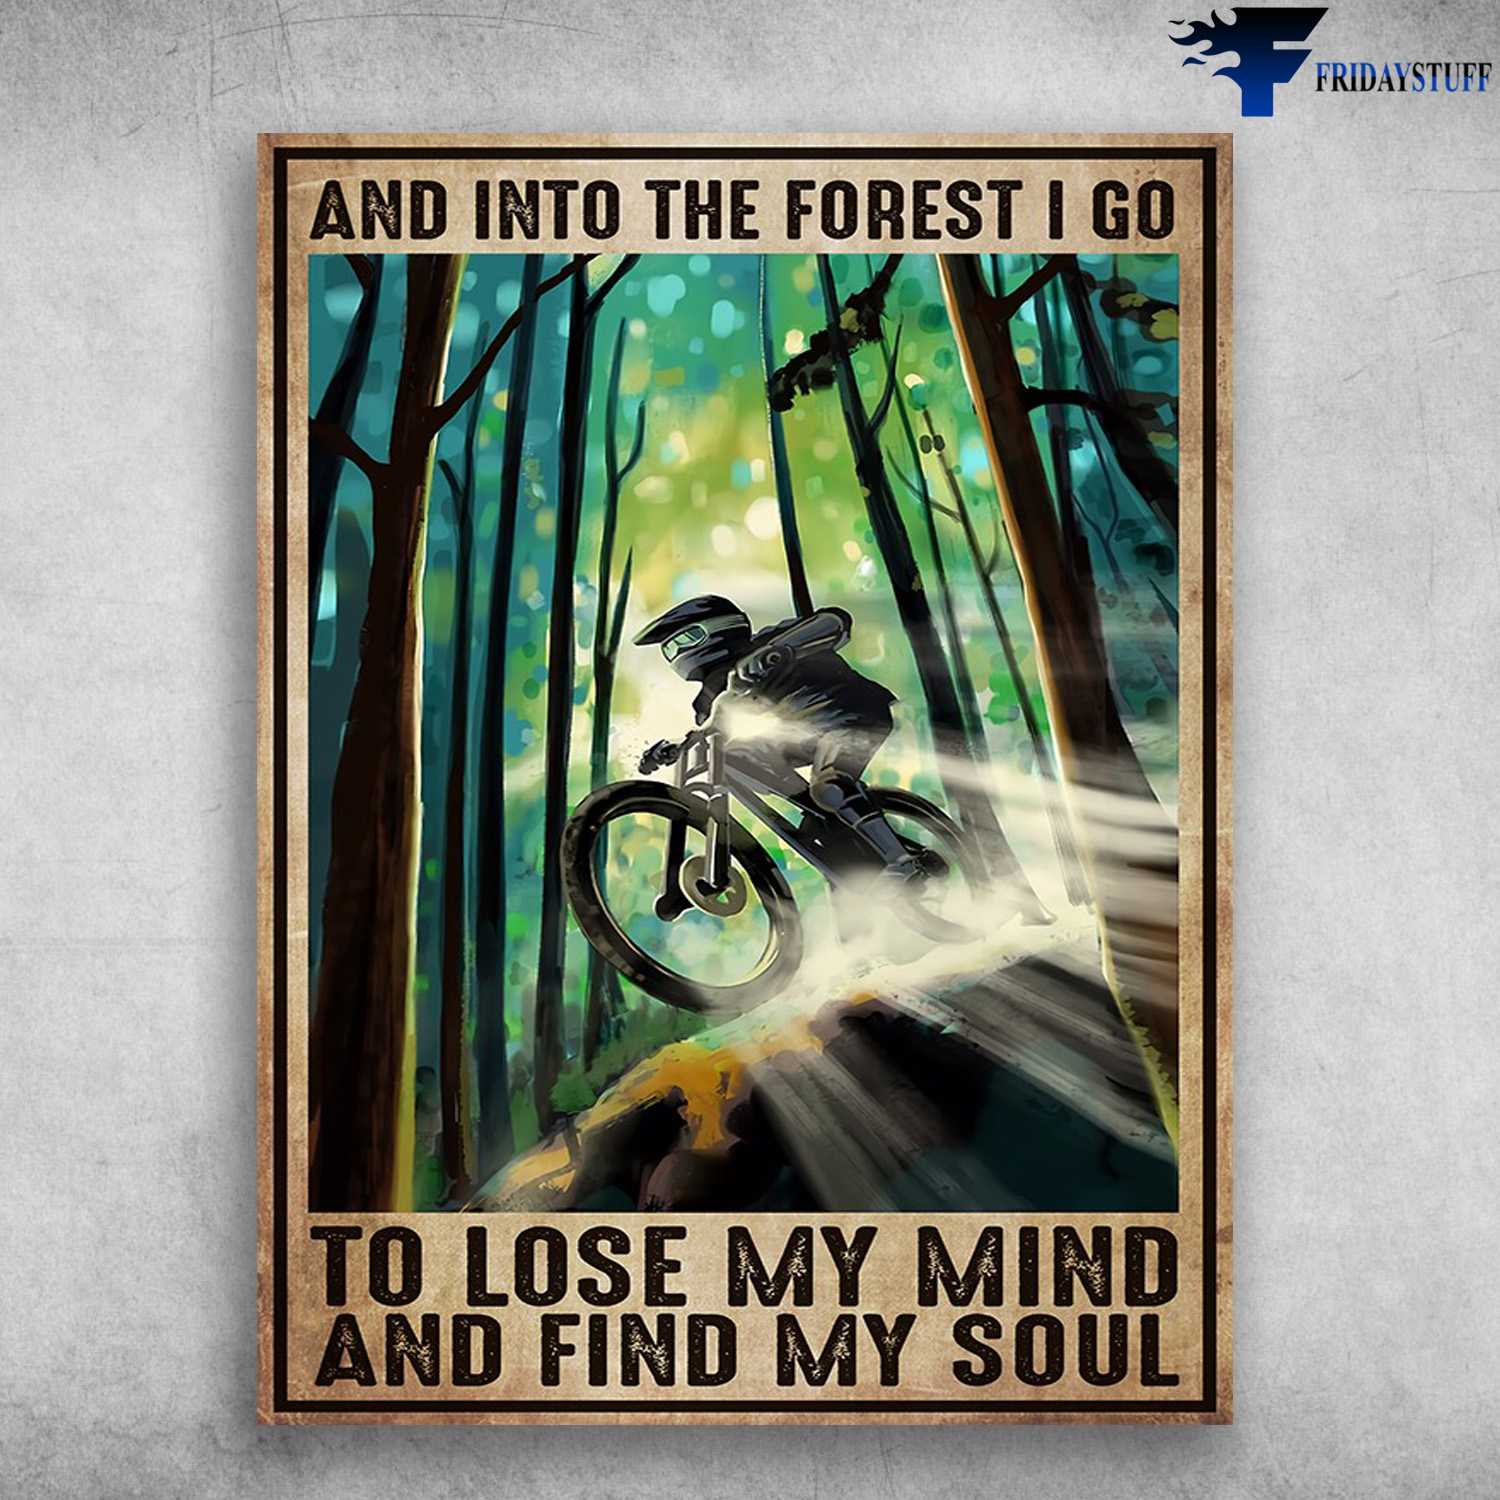 Mountain Biking, Biker Poster - And Into The Forest, I Go To Lose My Mind, And Find My Soul